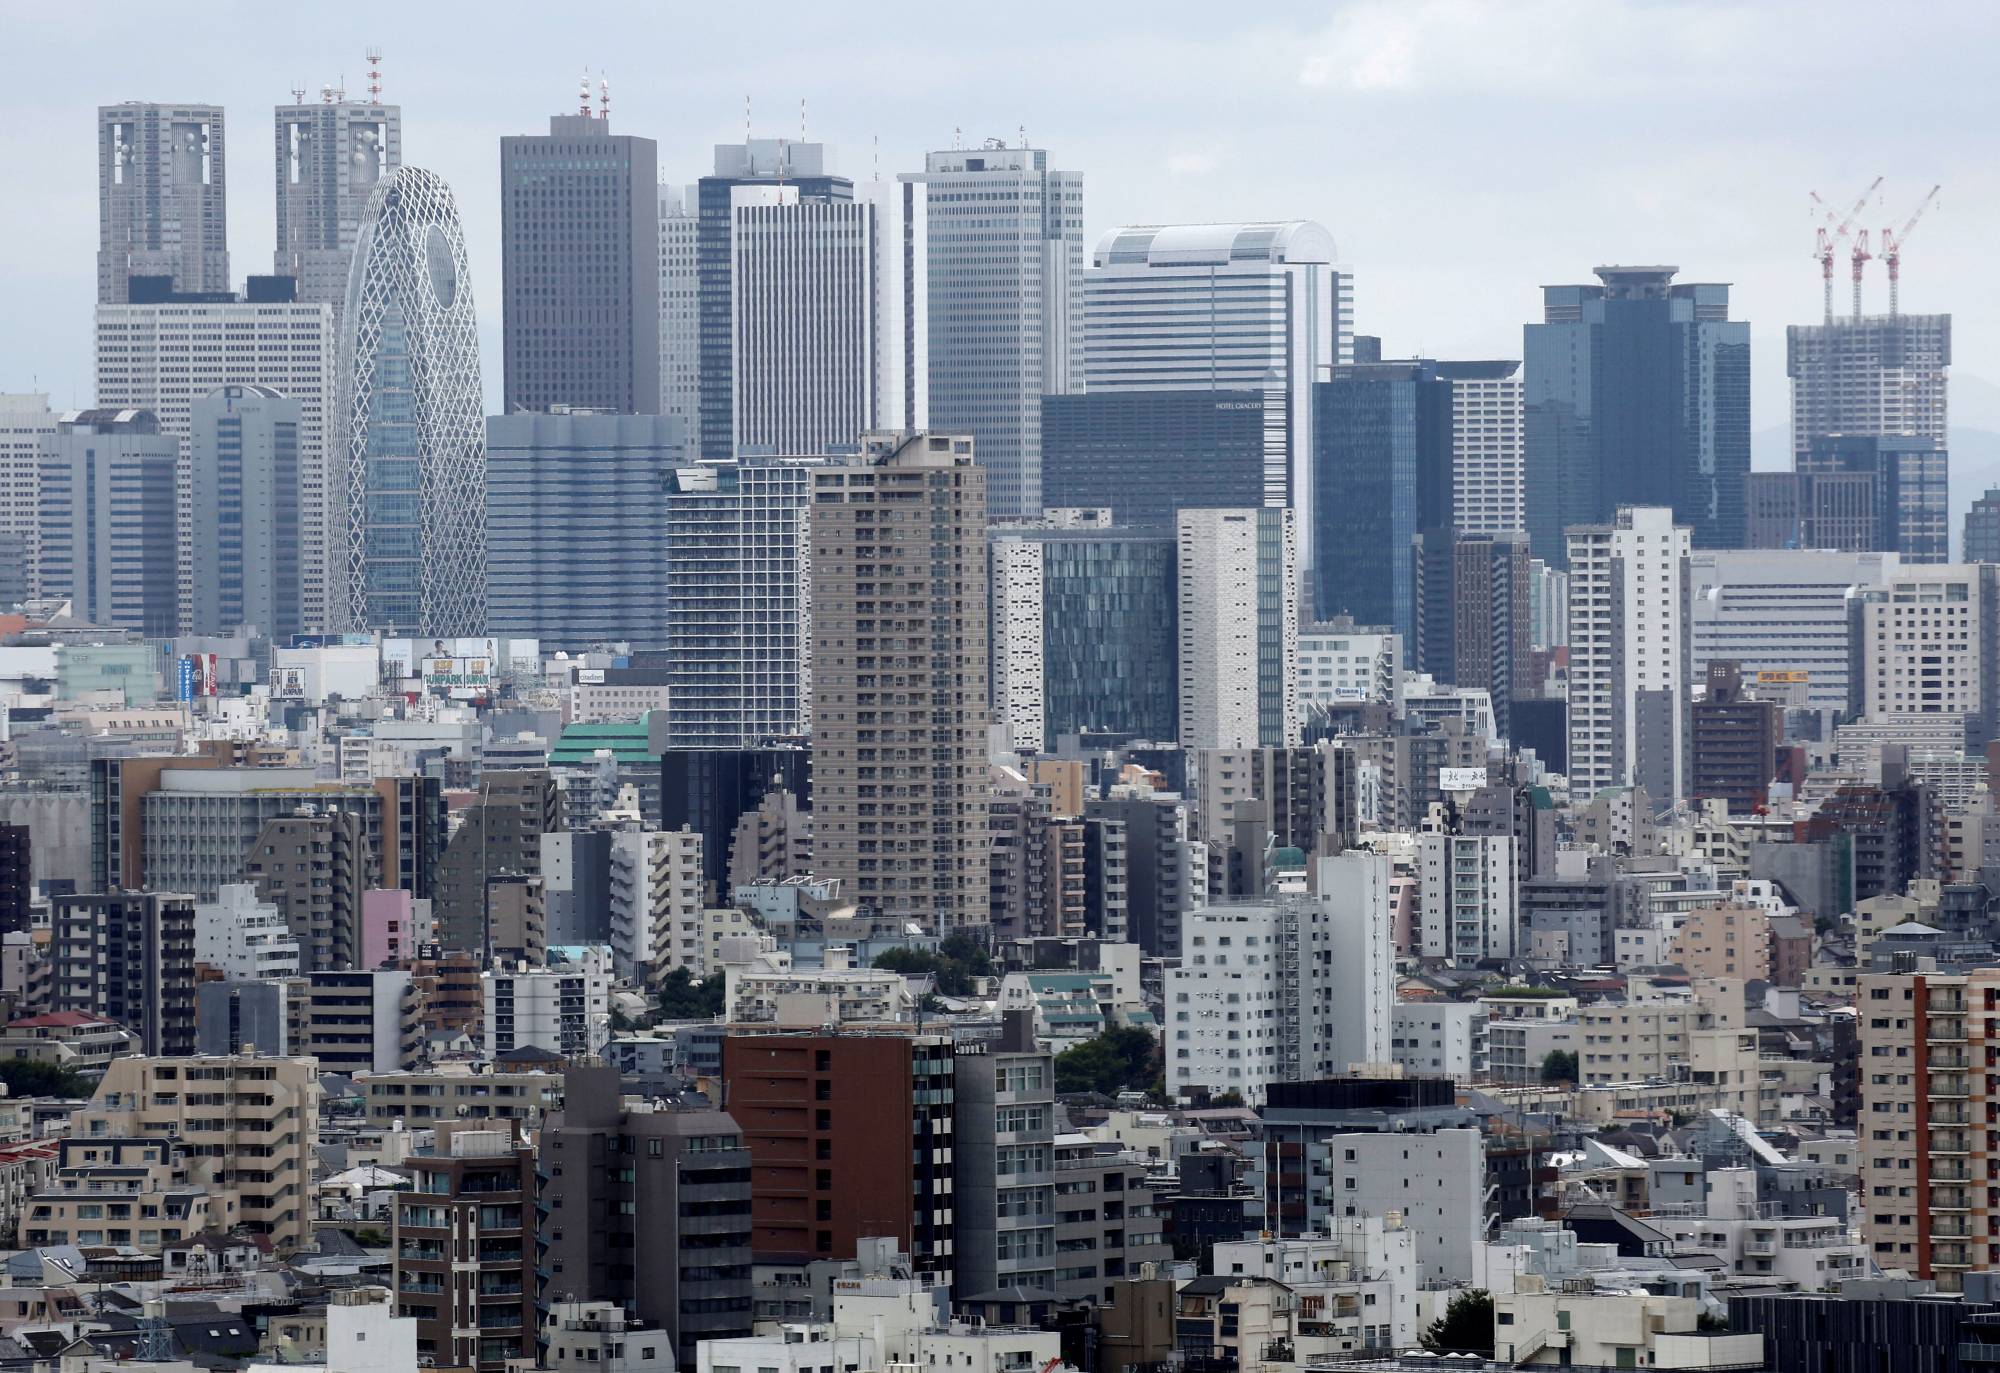 Japan's property market lures private equity with solid yields